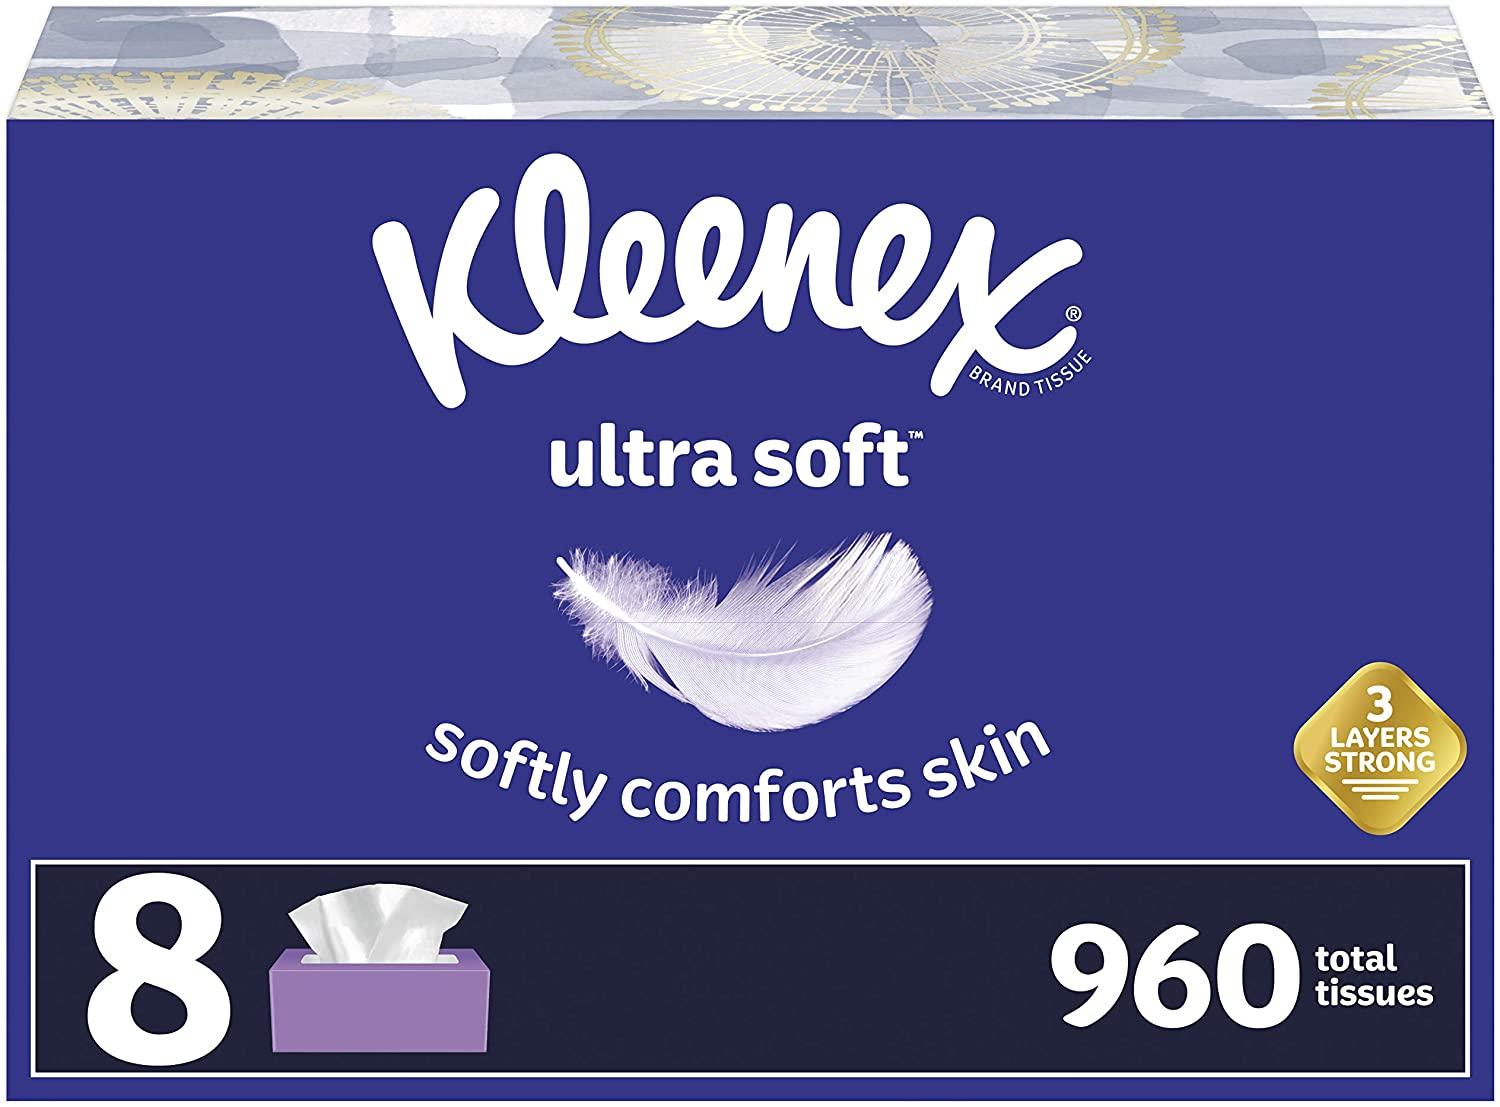 24 Kleenex Ultra Soft Facial Tissue Boxes for $24.43 Shipped